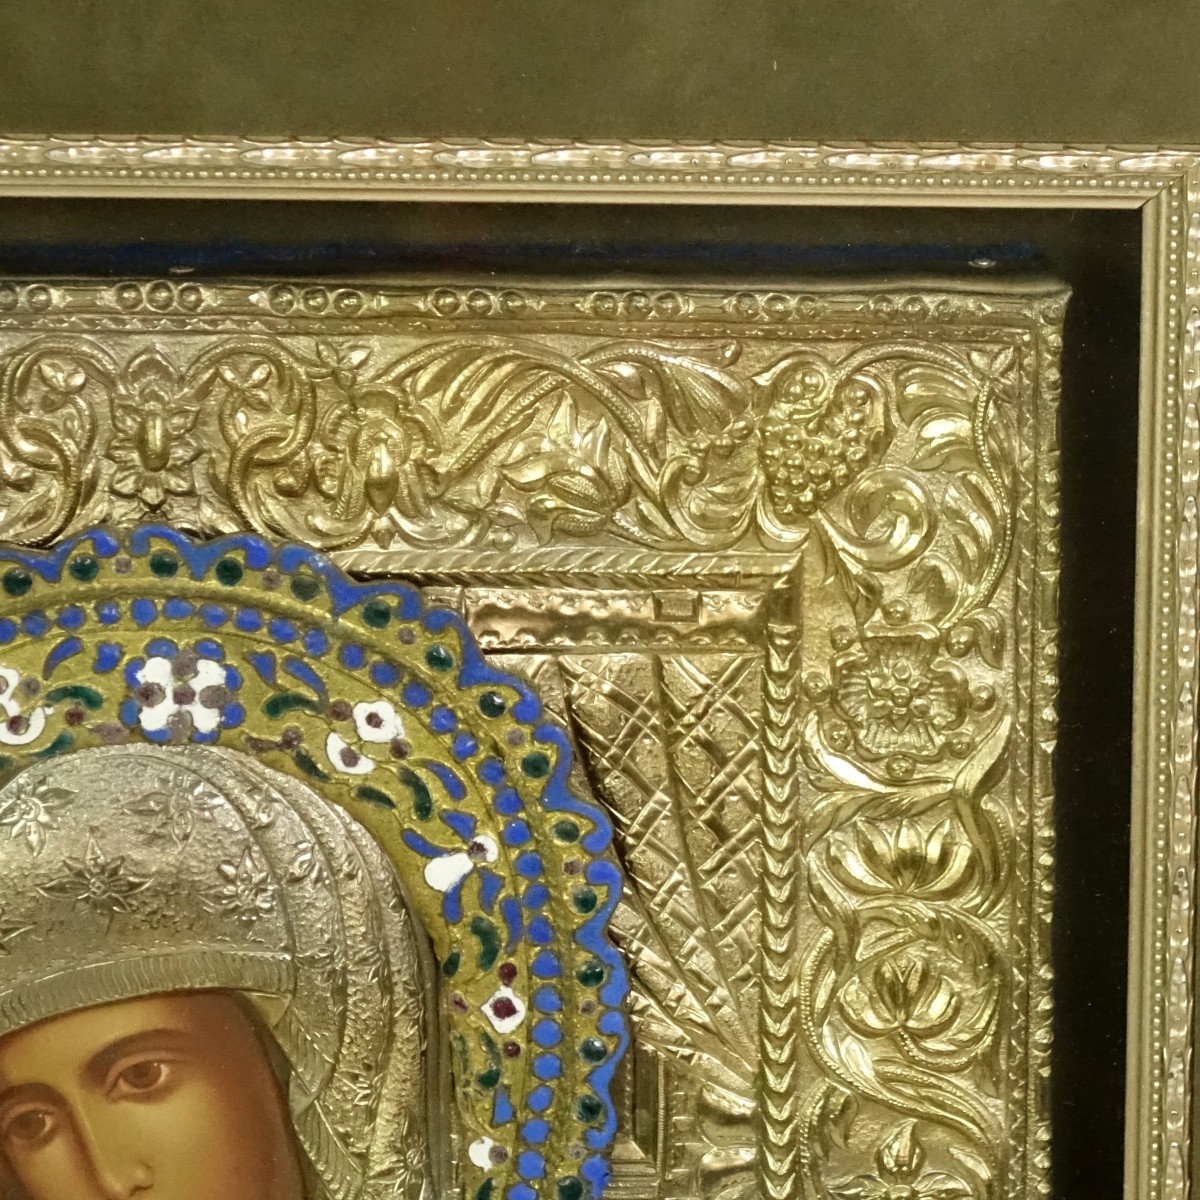 Russian Silver and Enamel Icon